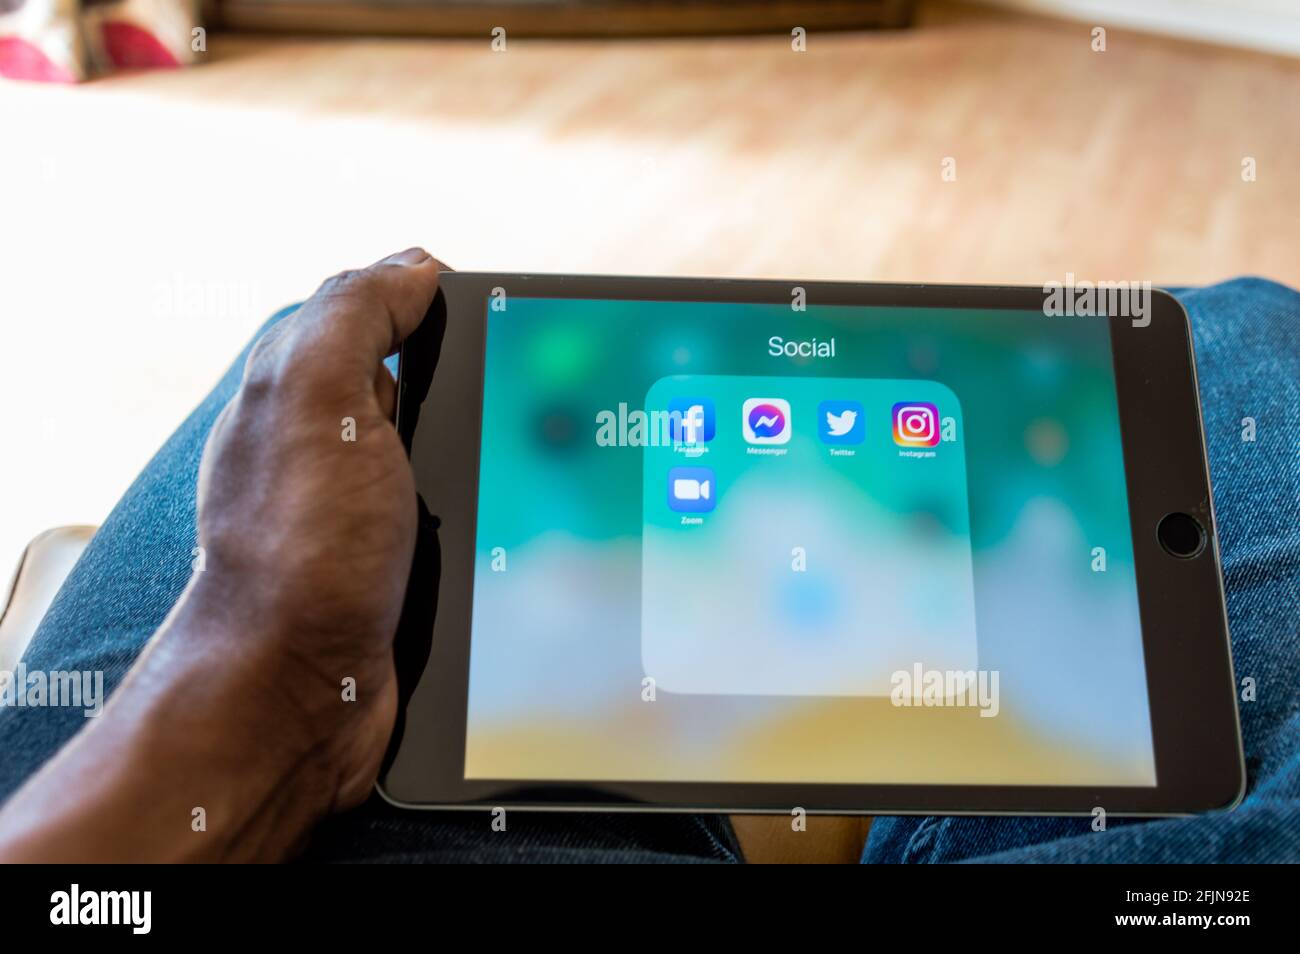 Adult male looking at Social media icons on ipad Stock Photo